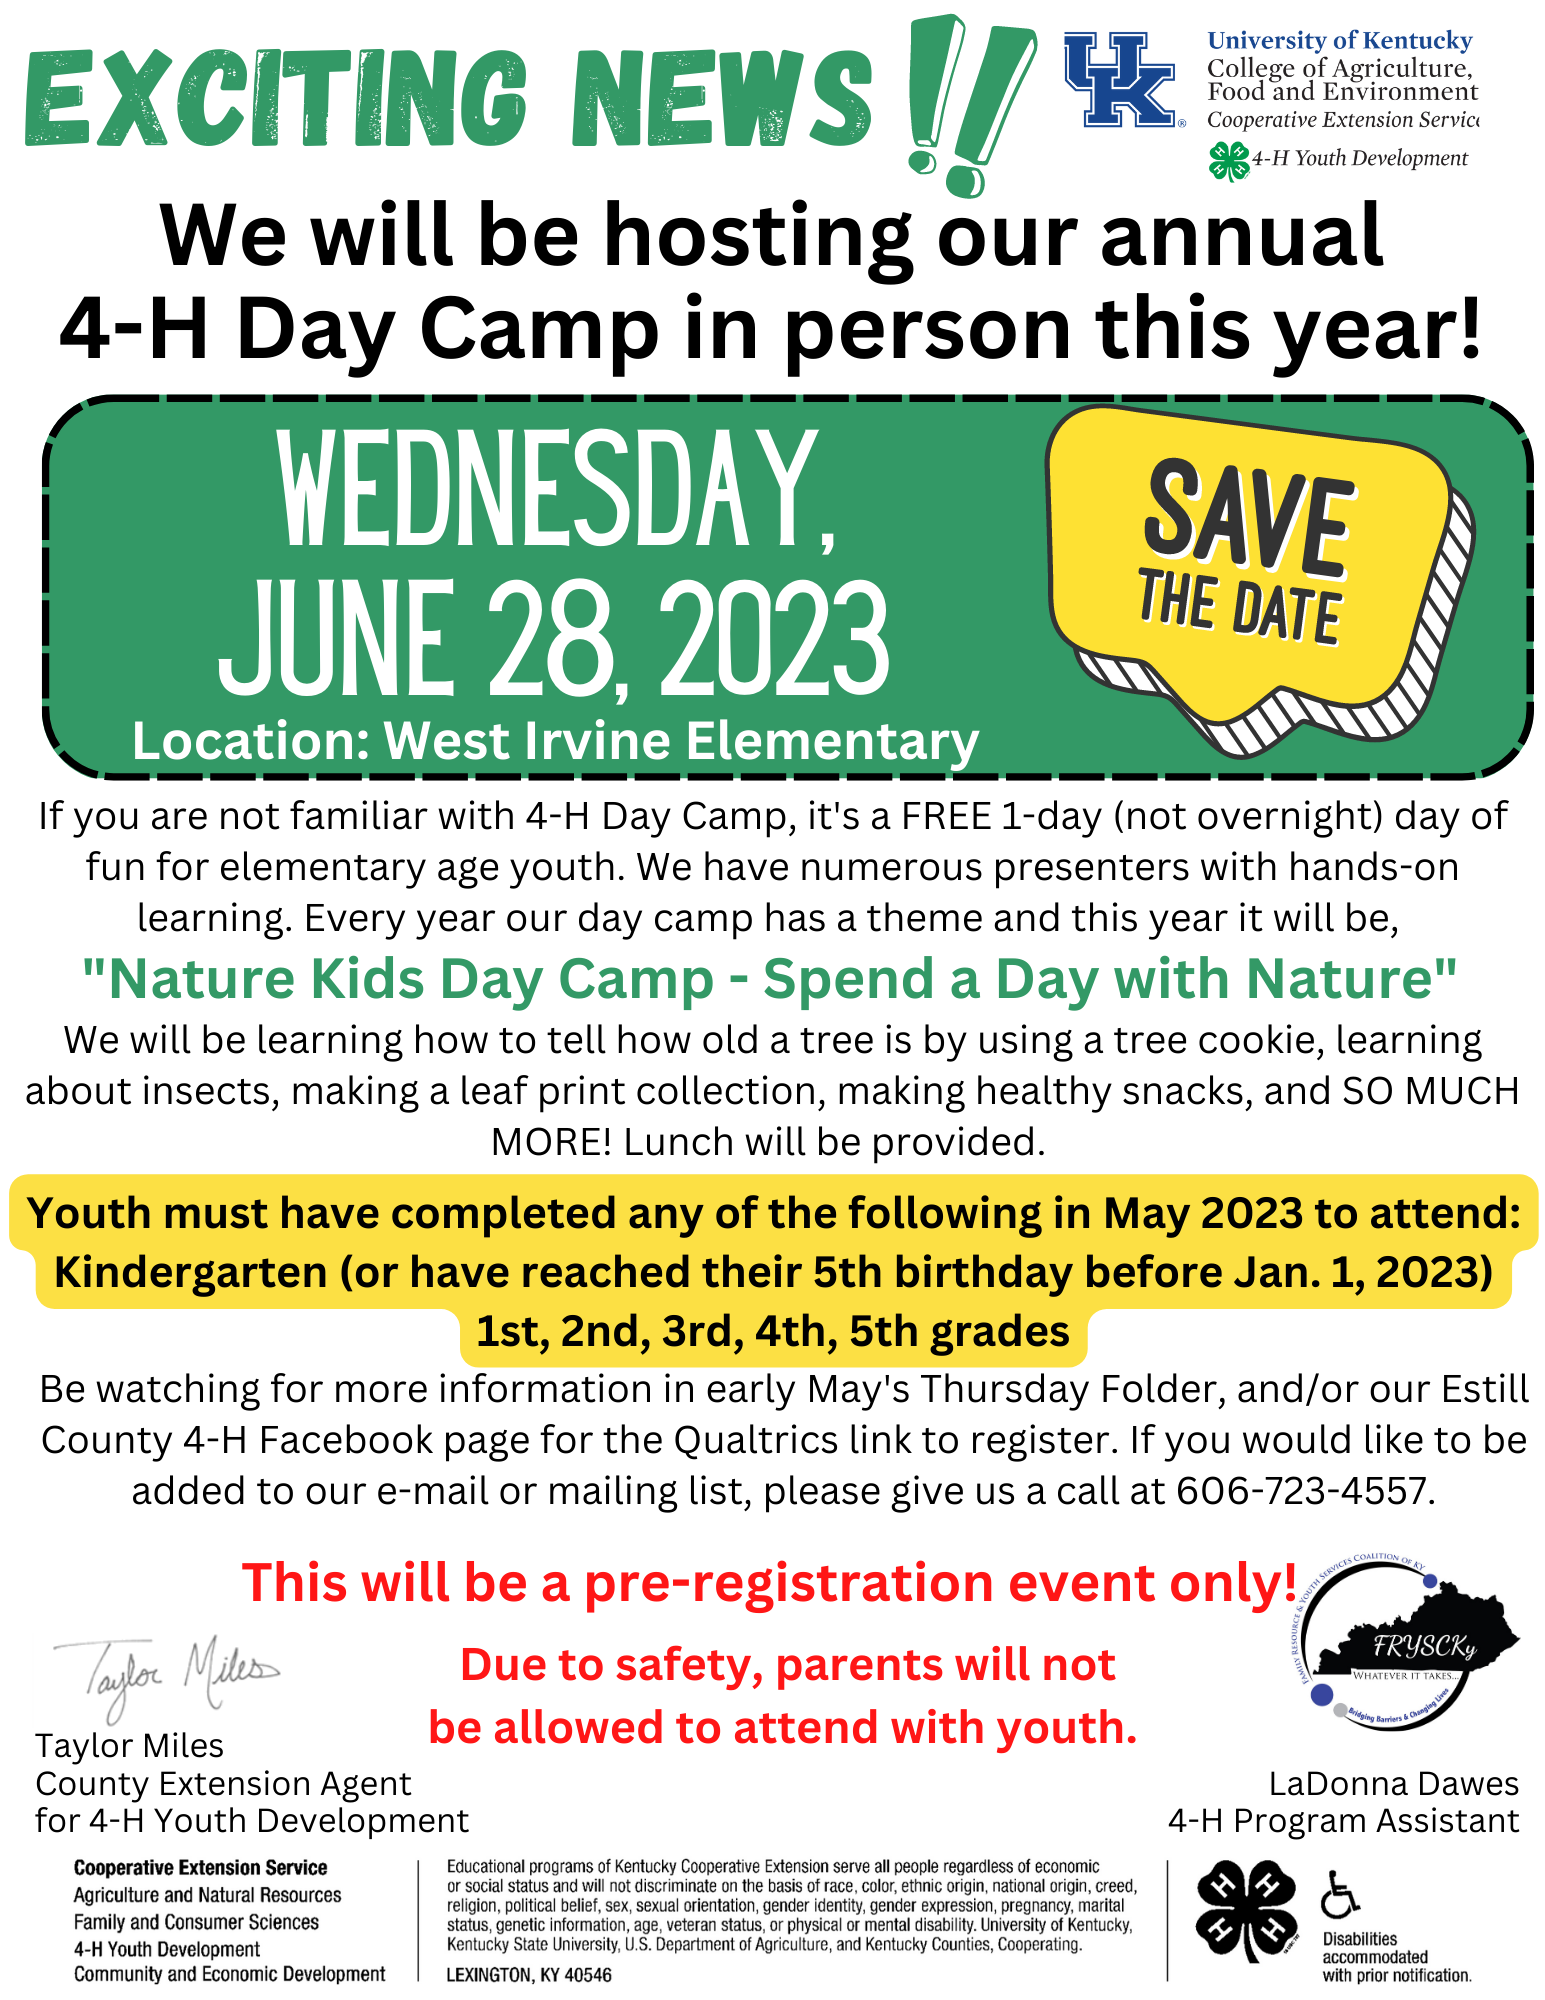 4-H Day Camp informational save the date flyer